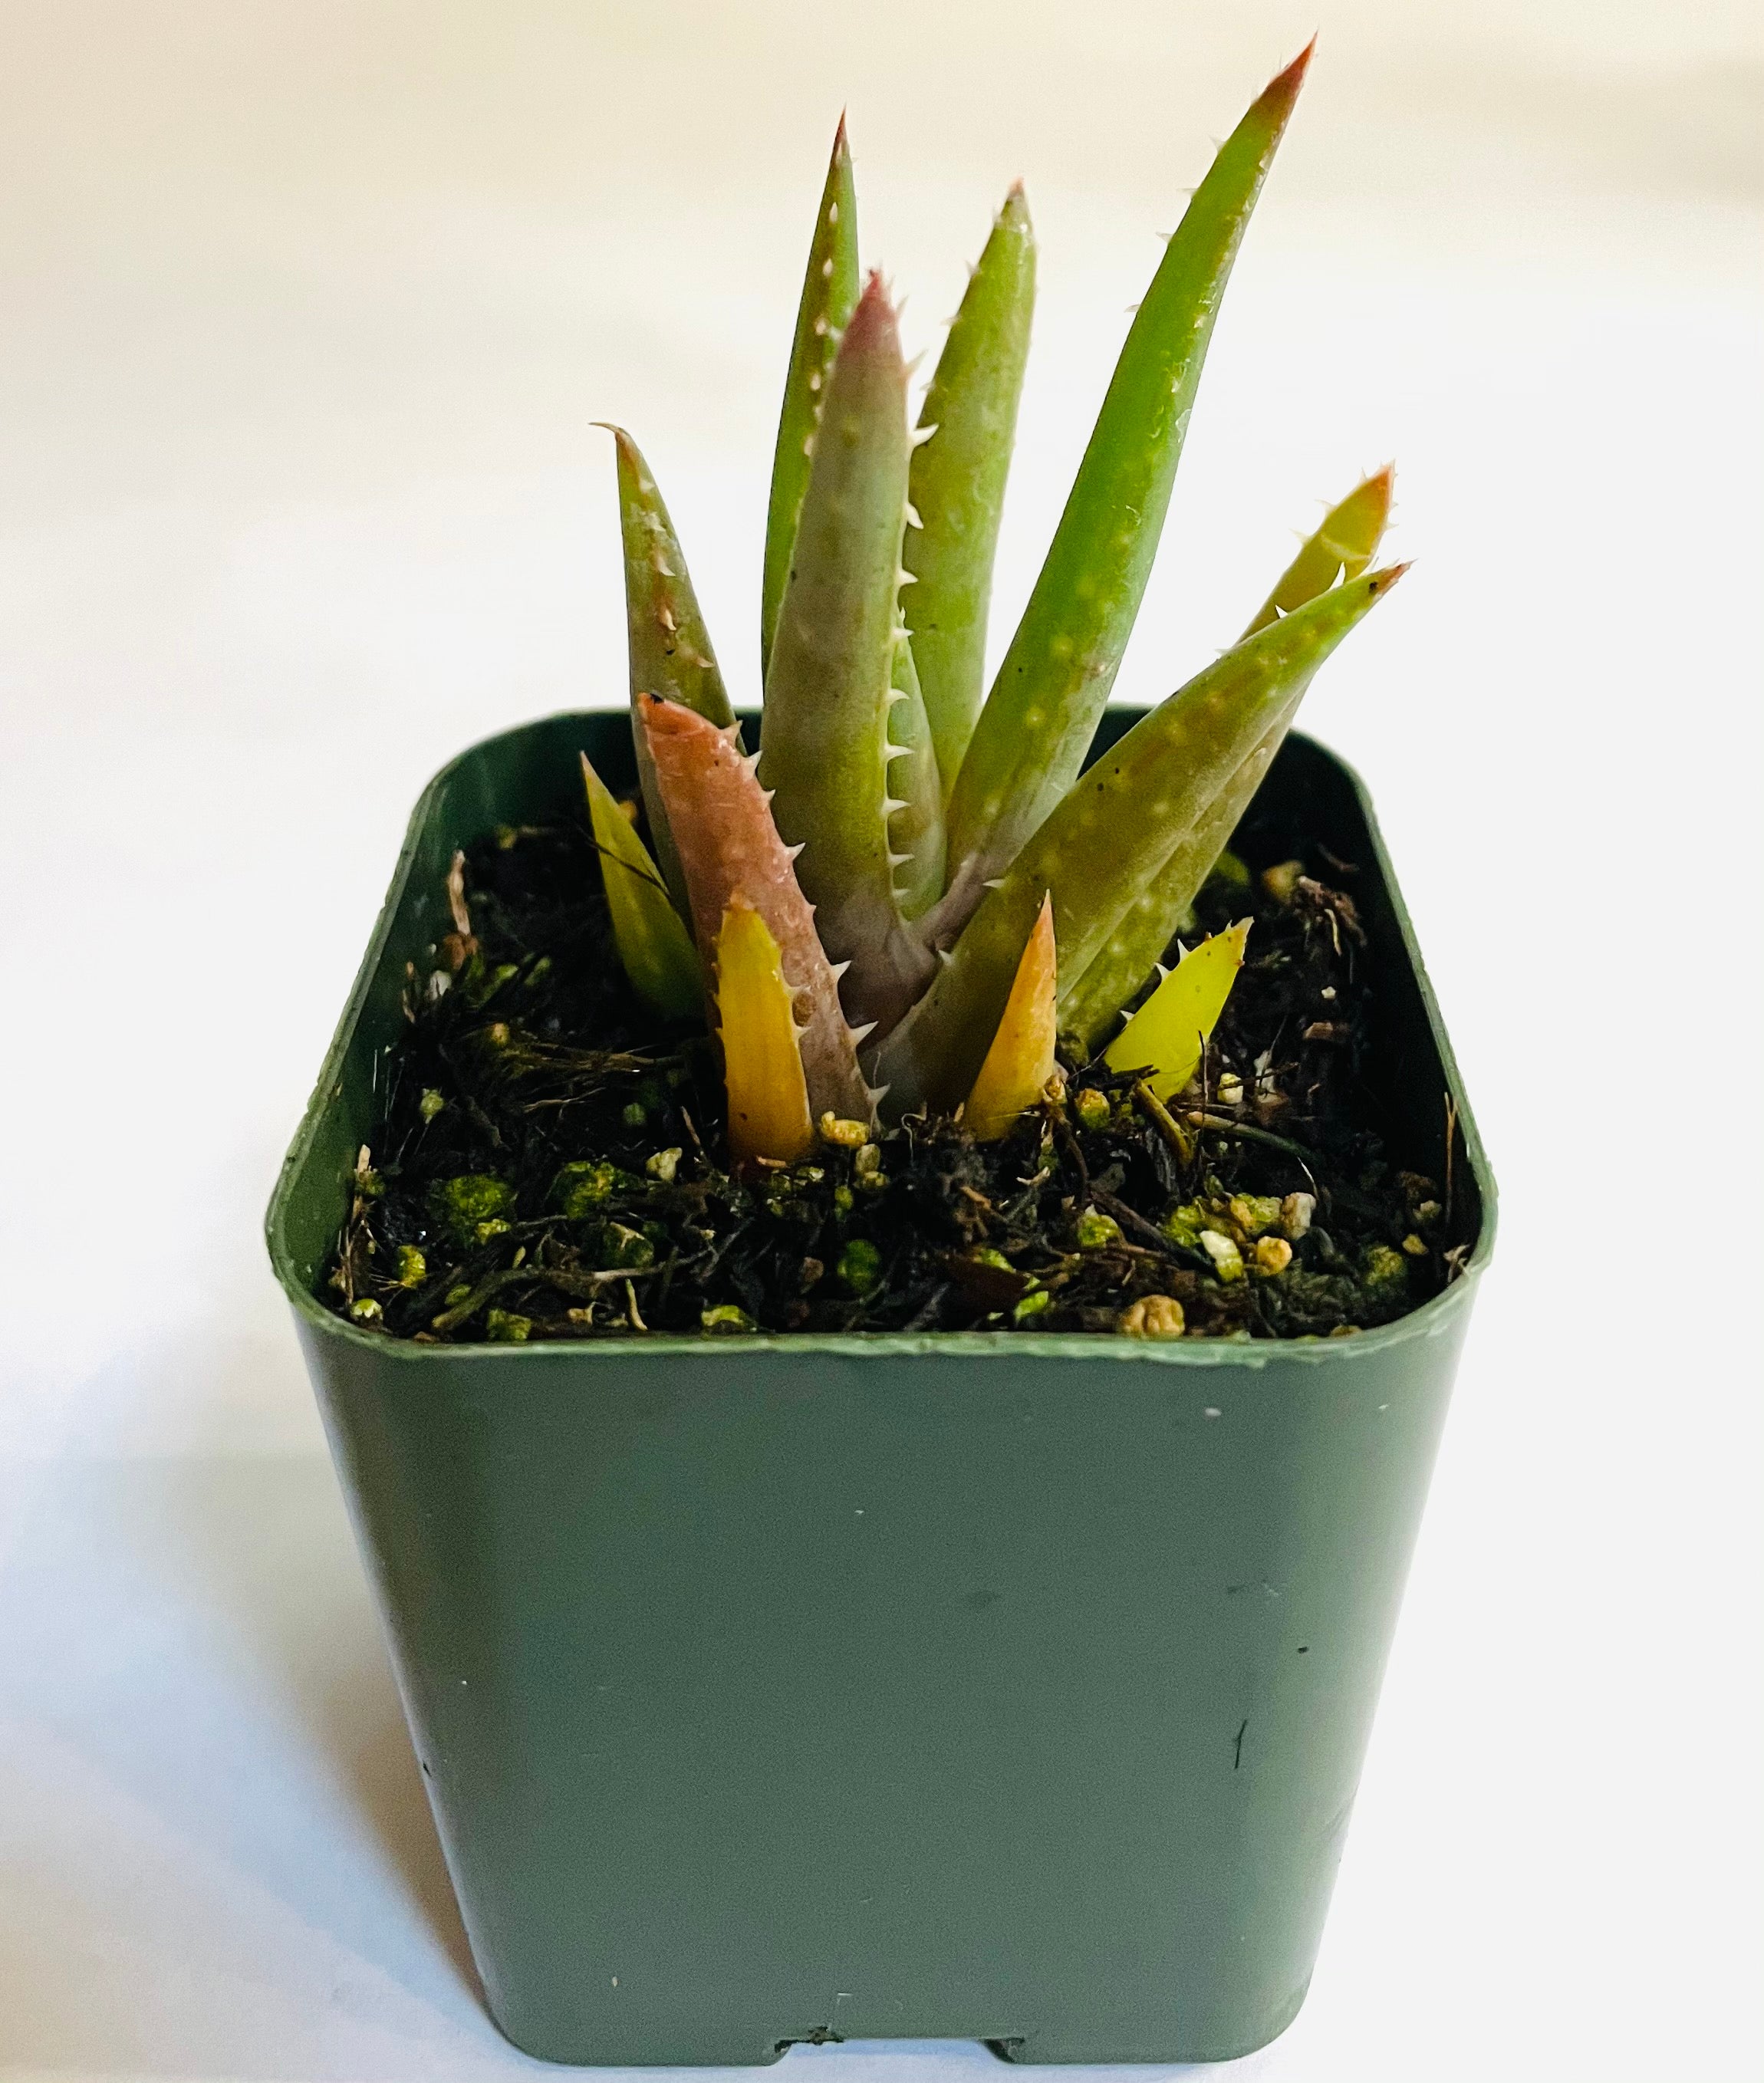 Aloe Crosby's Prolific: a closeup of a small rosette-forming succulent, which has green semi-translucent leaves with harmless teeth along the edges.